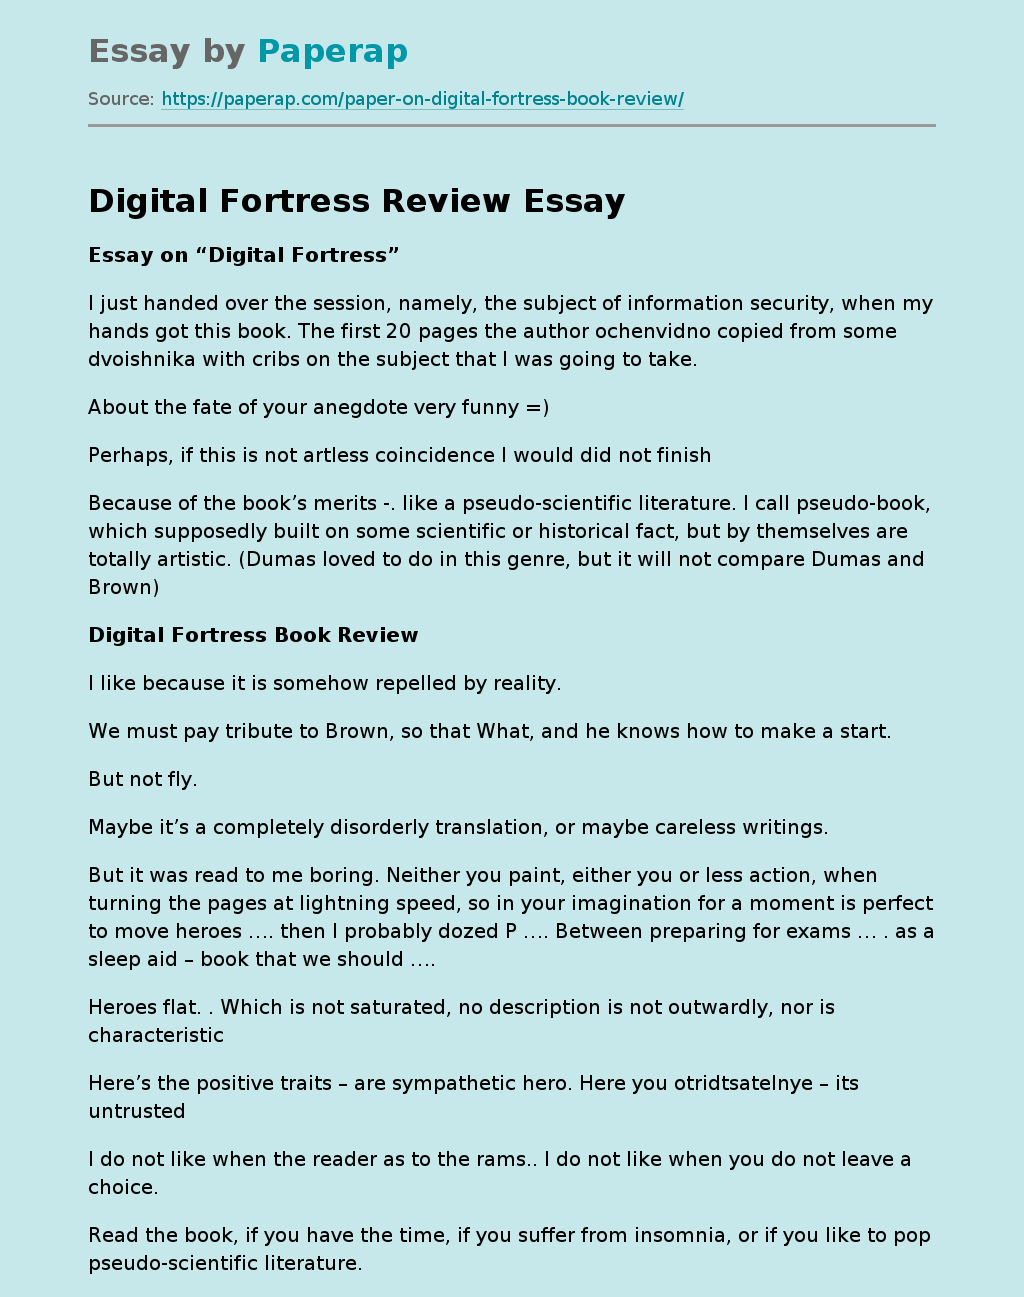 Digital Fortress Review